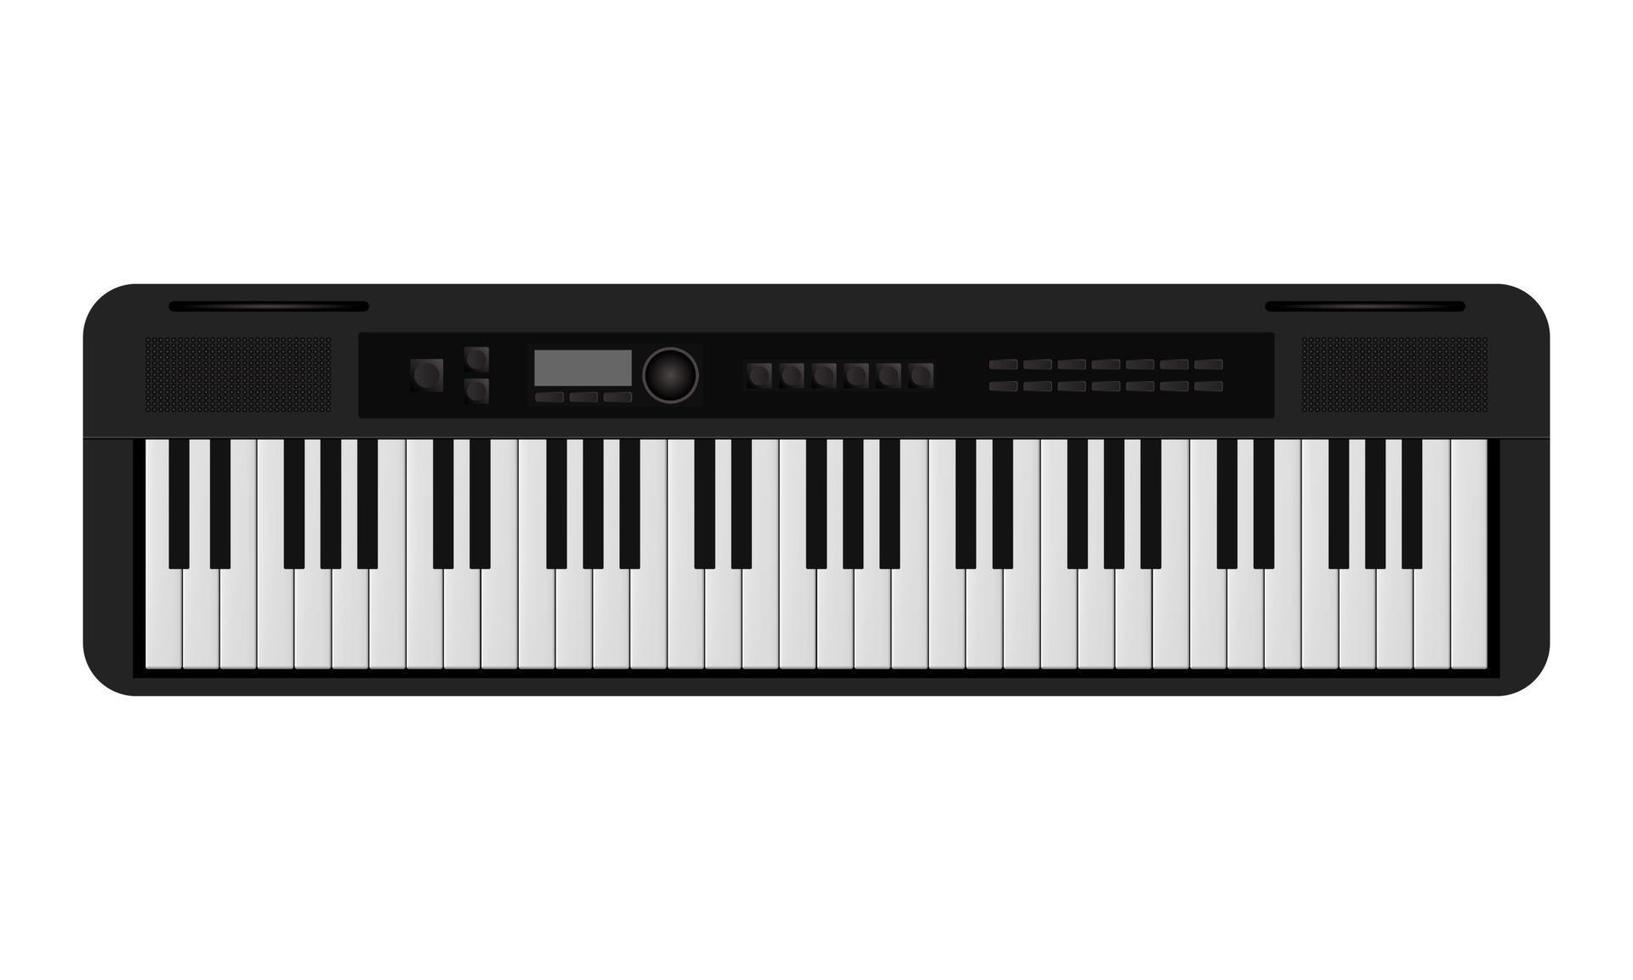 Music synthesizer in realistic style Vector illustration.